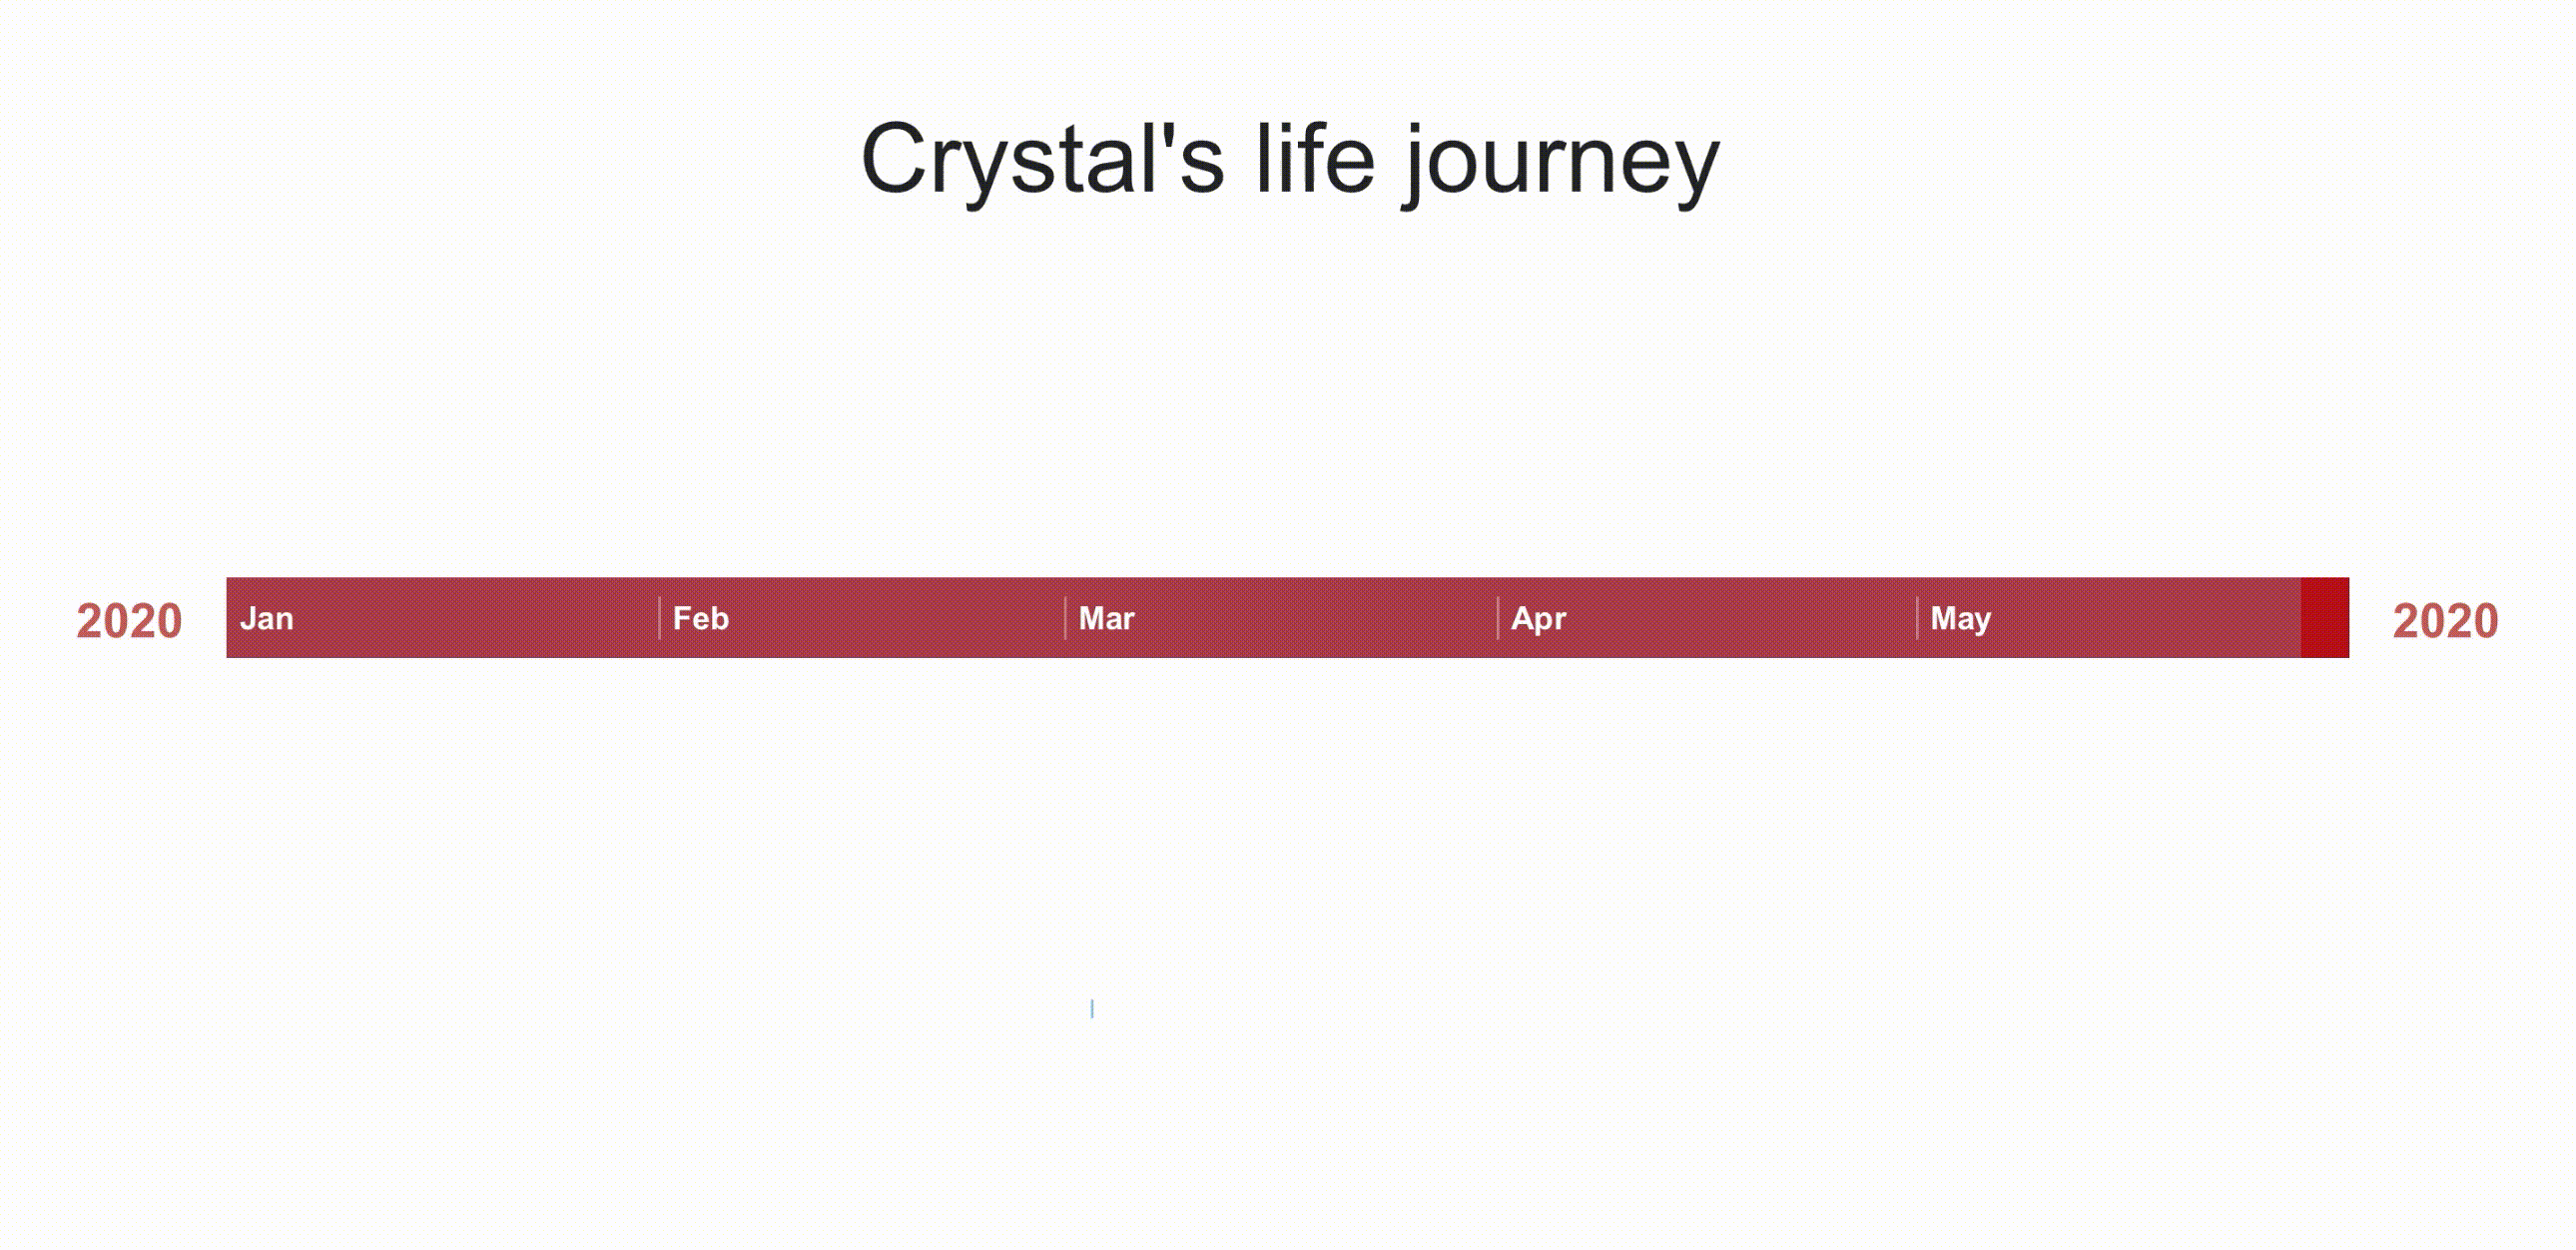 This is a timeline showcases Crystal's life journey during coronavirus